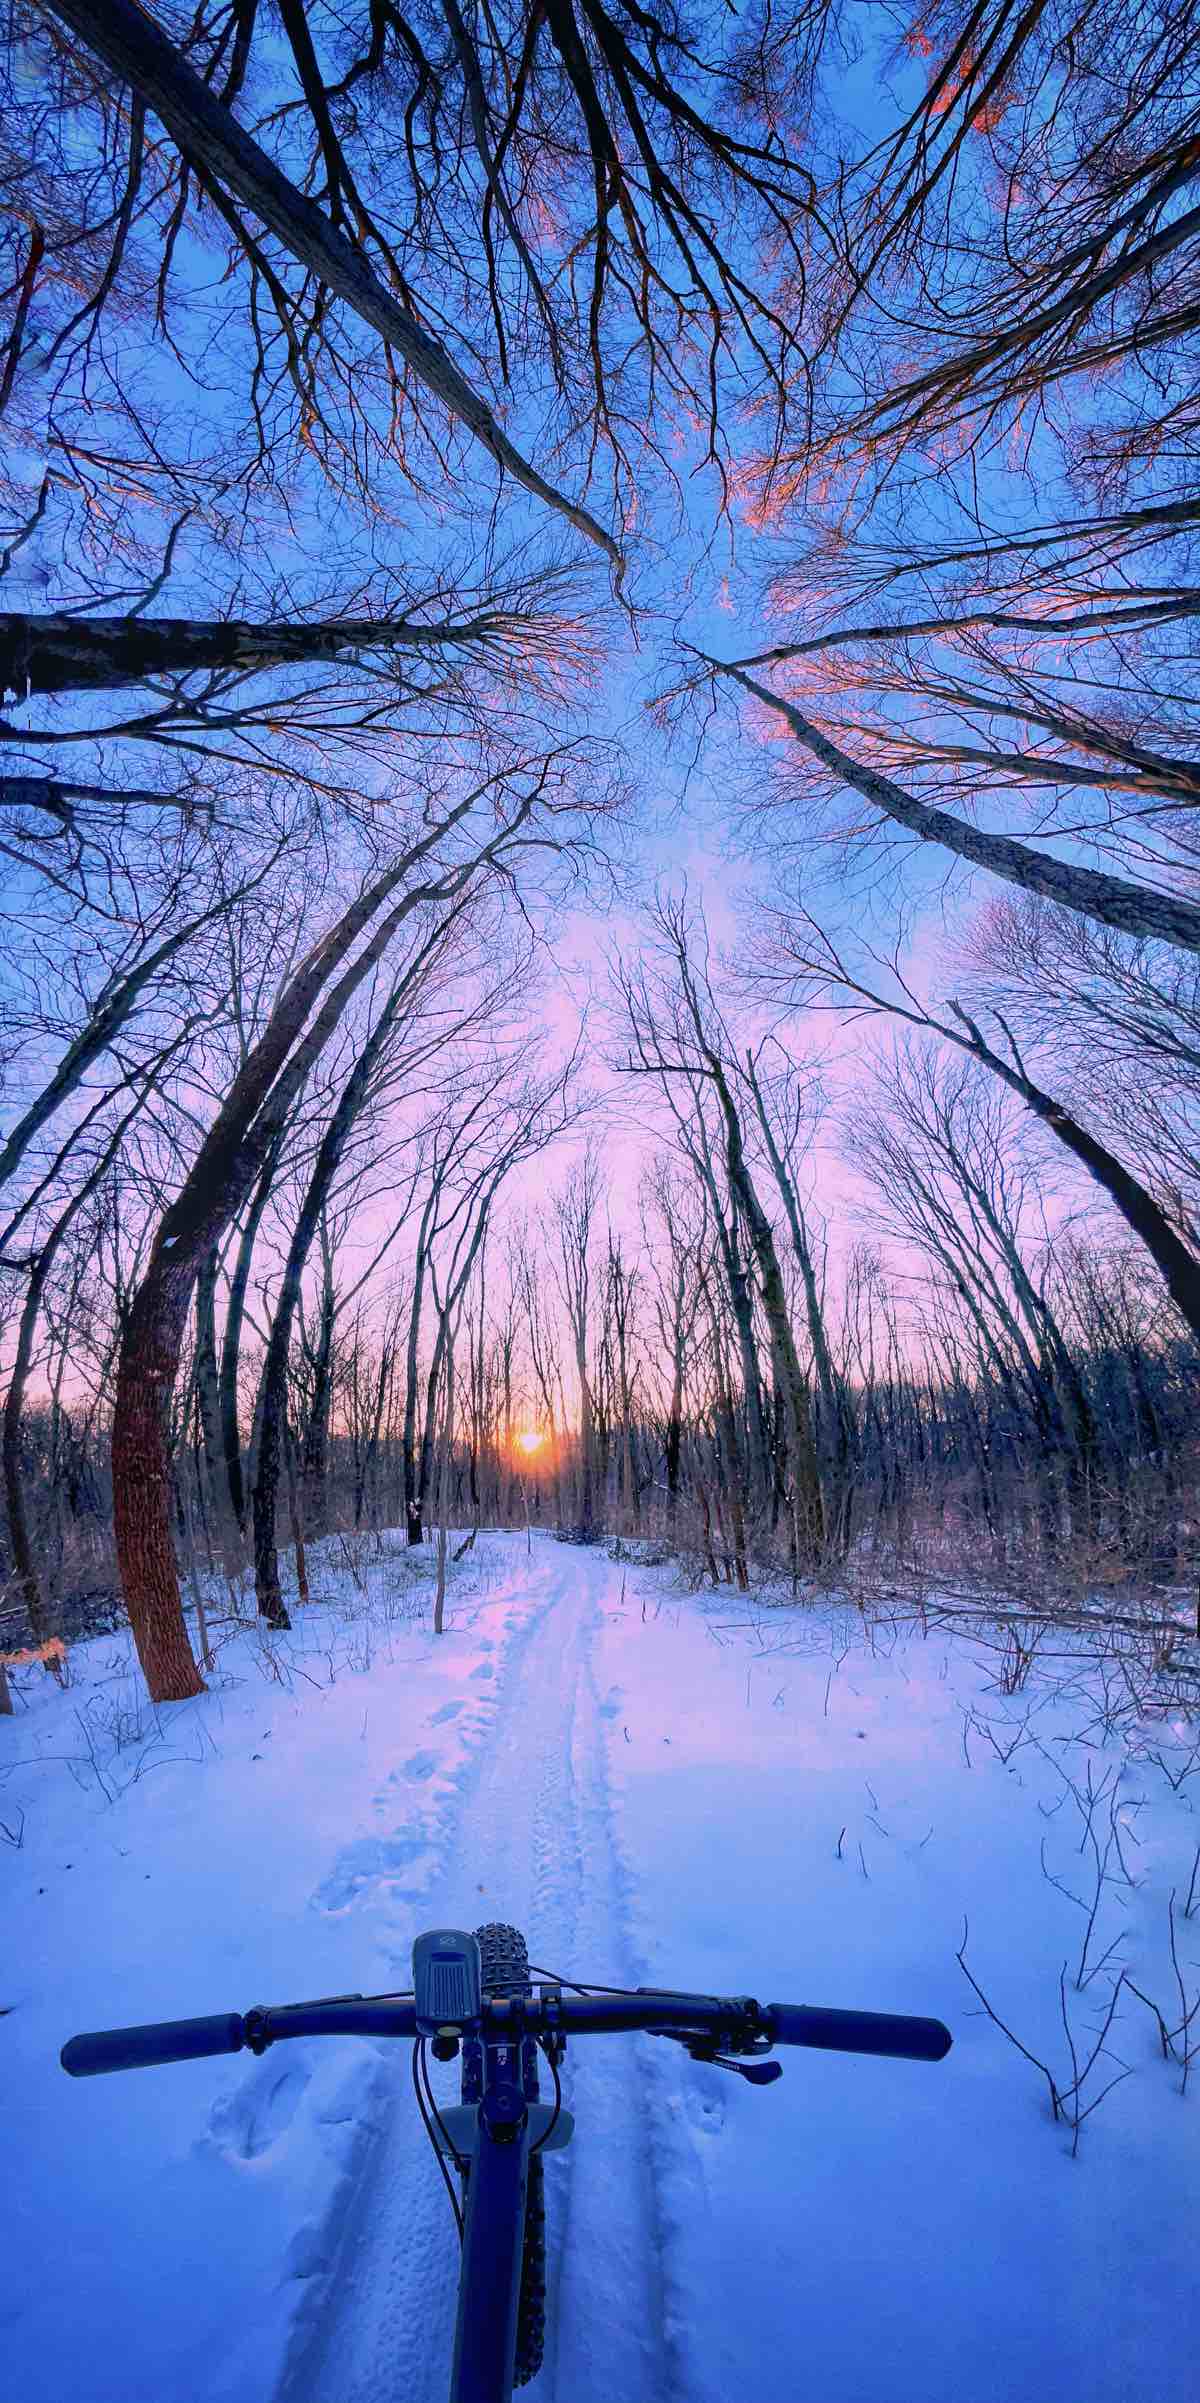 bikerumor pic of the day potato creek state park in north liberty indiana the pov from the handlebars of a bicycle looking out over groomed snow trail with an orange sun peeing out from the horizon and the dark silhouette of trees beyond. the photo is a vertical panorama so the trees appear to converge in the top half of the photo.